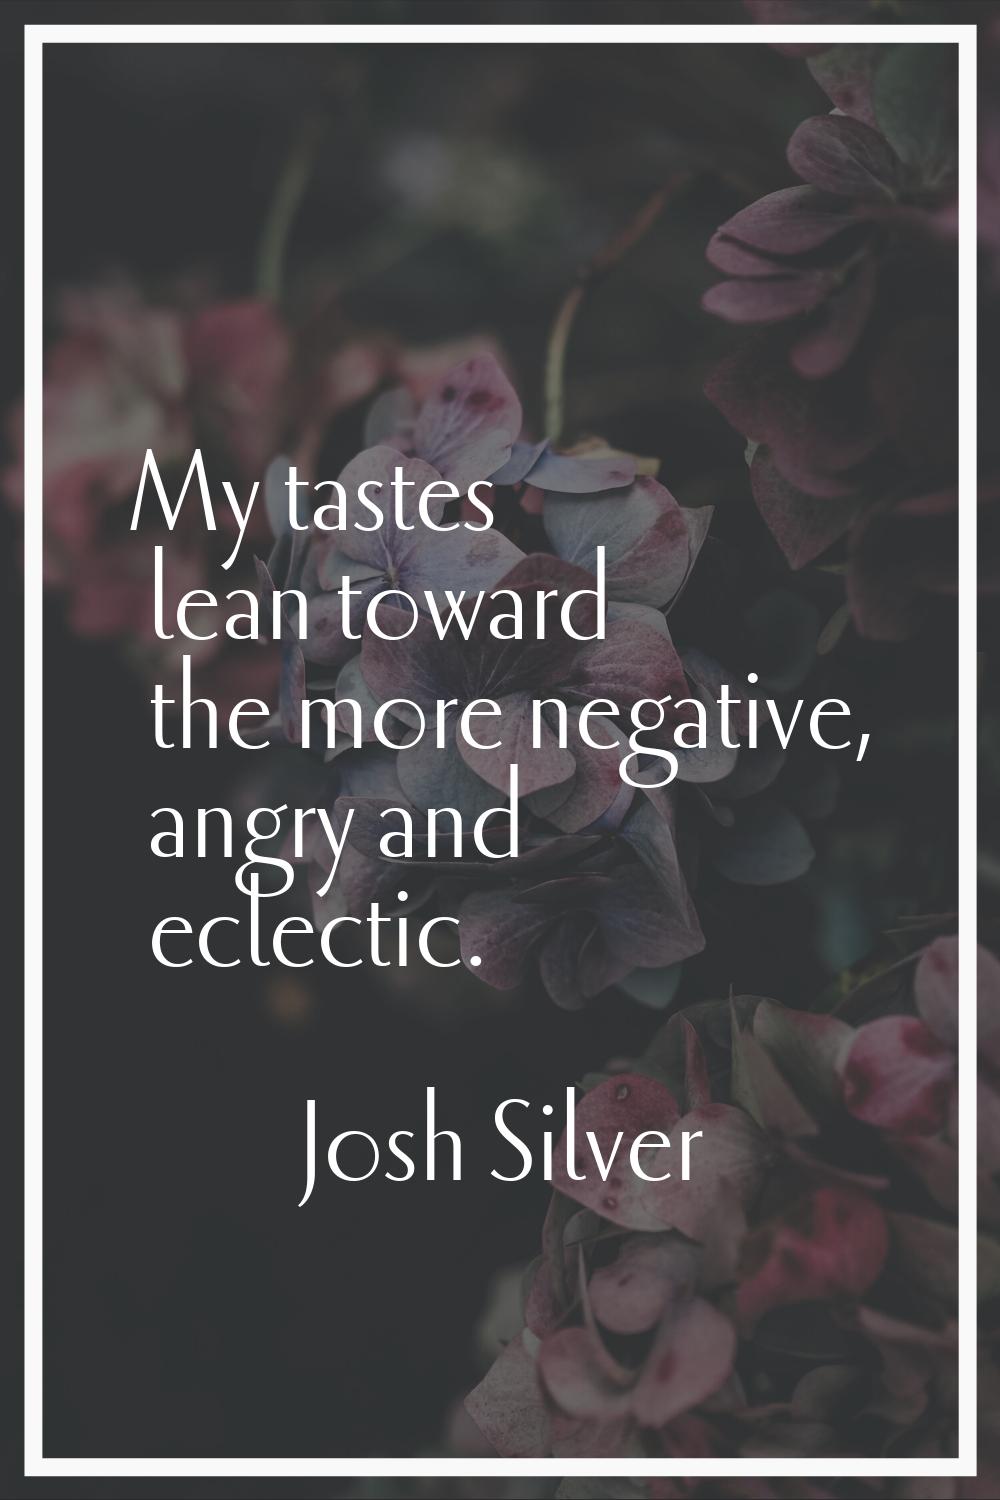 My tastes lean toward the more negative, angry and eclectic.